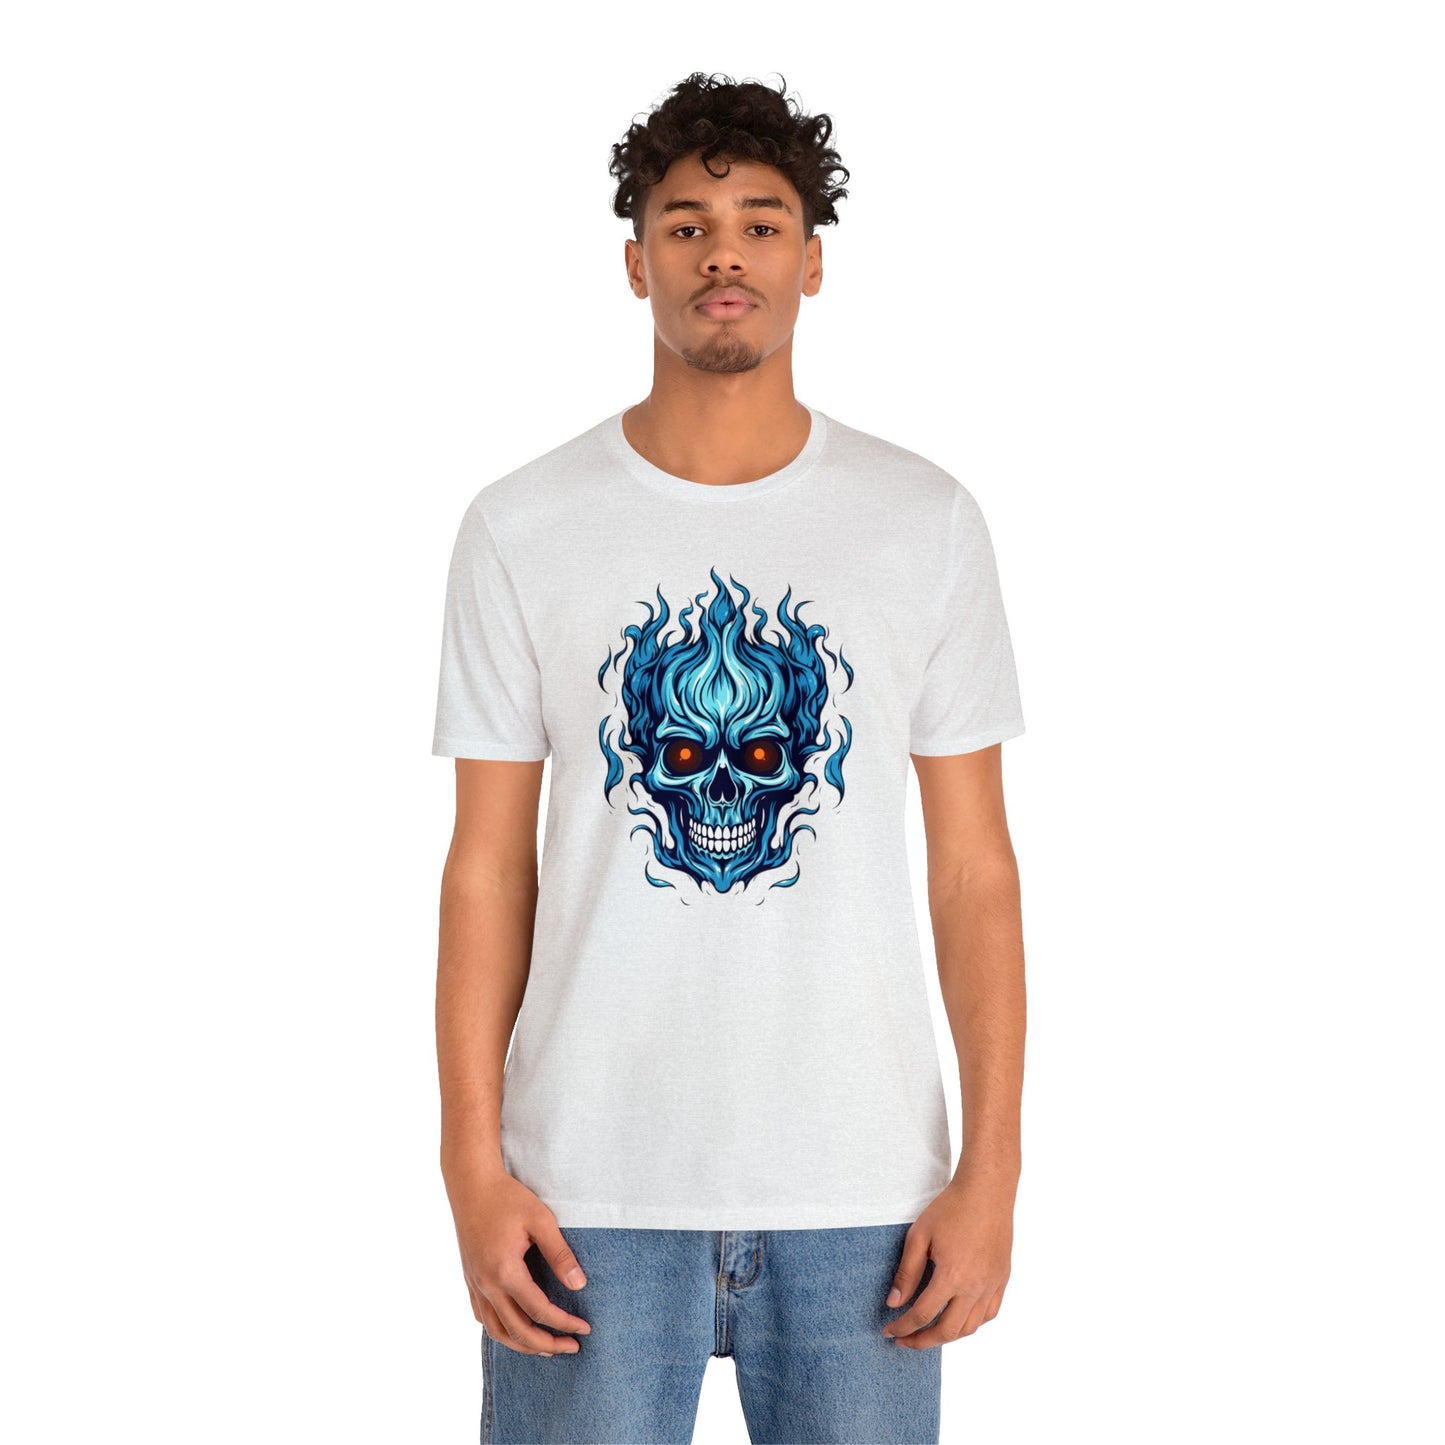 Men's Jersey Short Sleeve Tee - Blue Flaming Skull T-Shirt, Sizes Small To 3XL